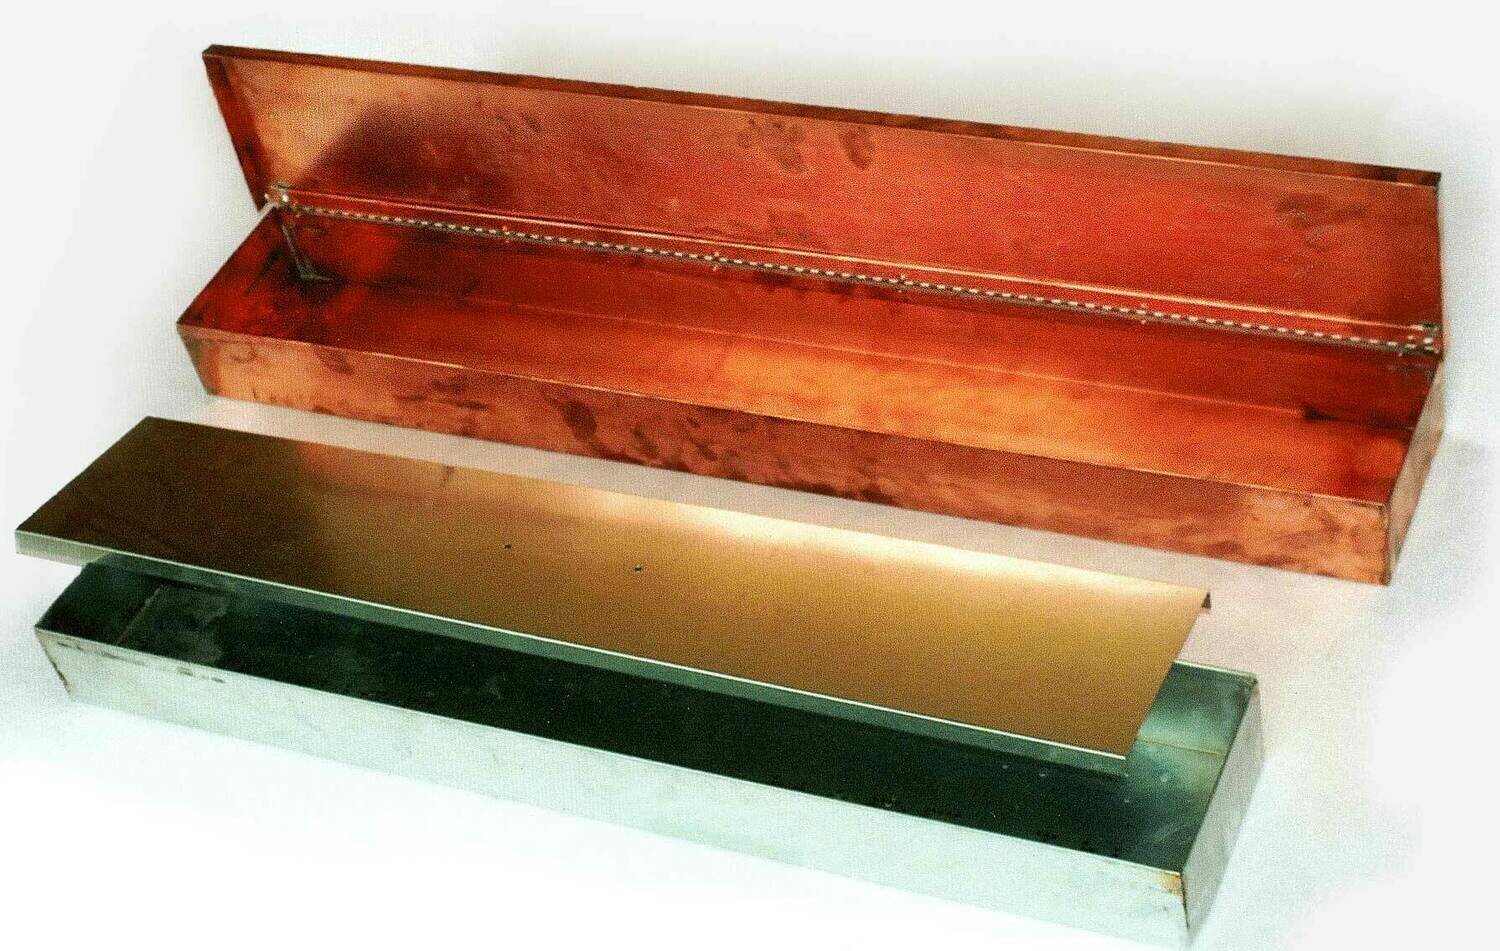 60" Copper Water Tray